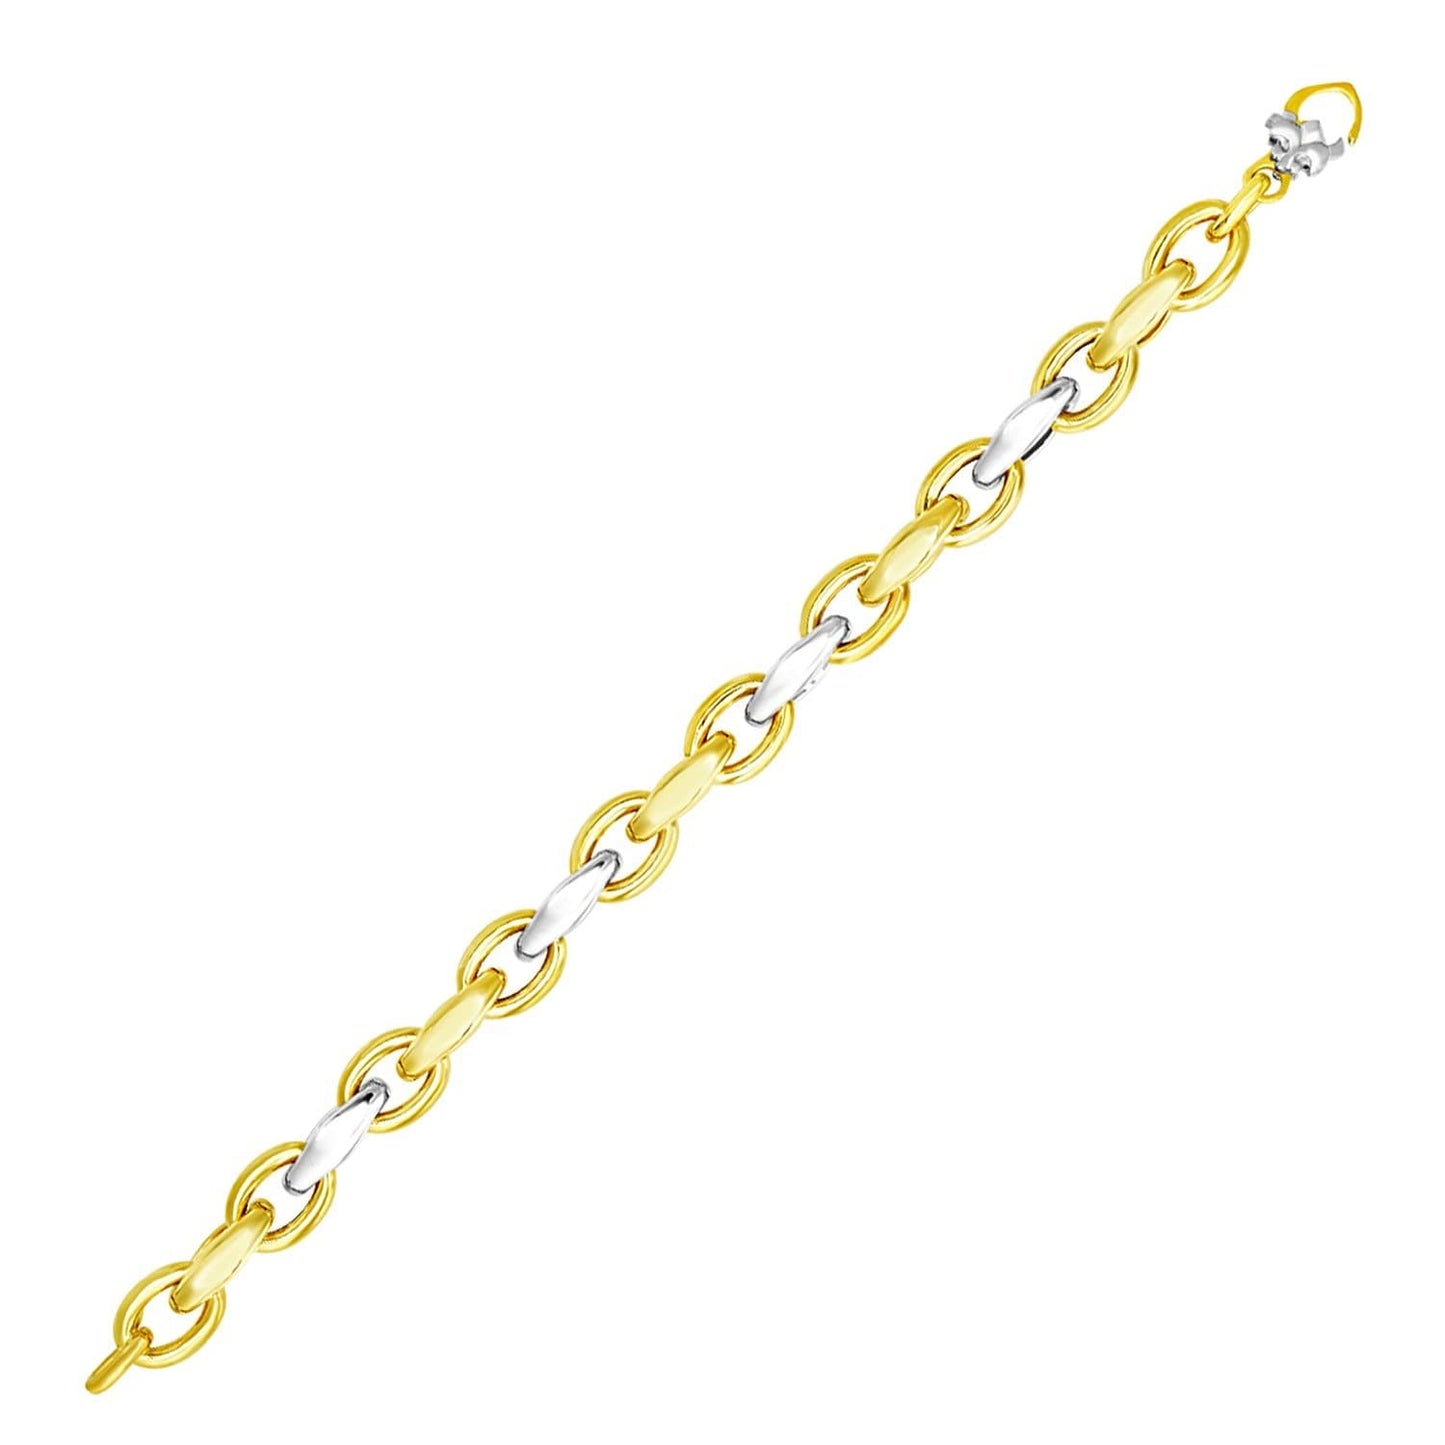 14k Two-Tone Gold Oval and Graduated Link Bracelet